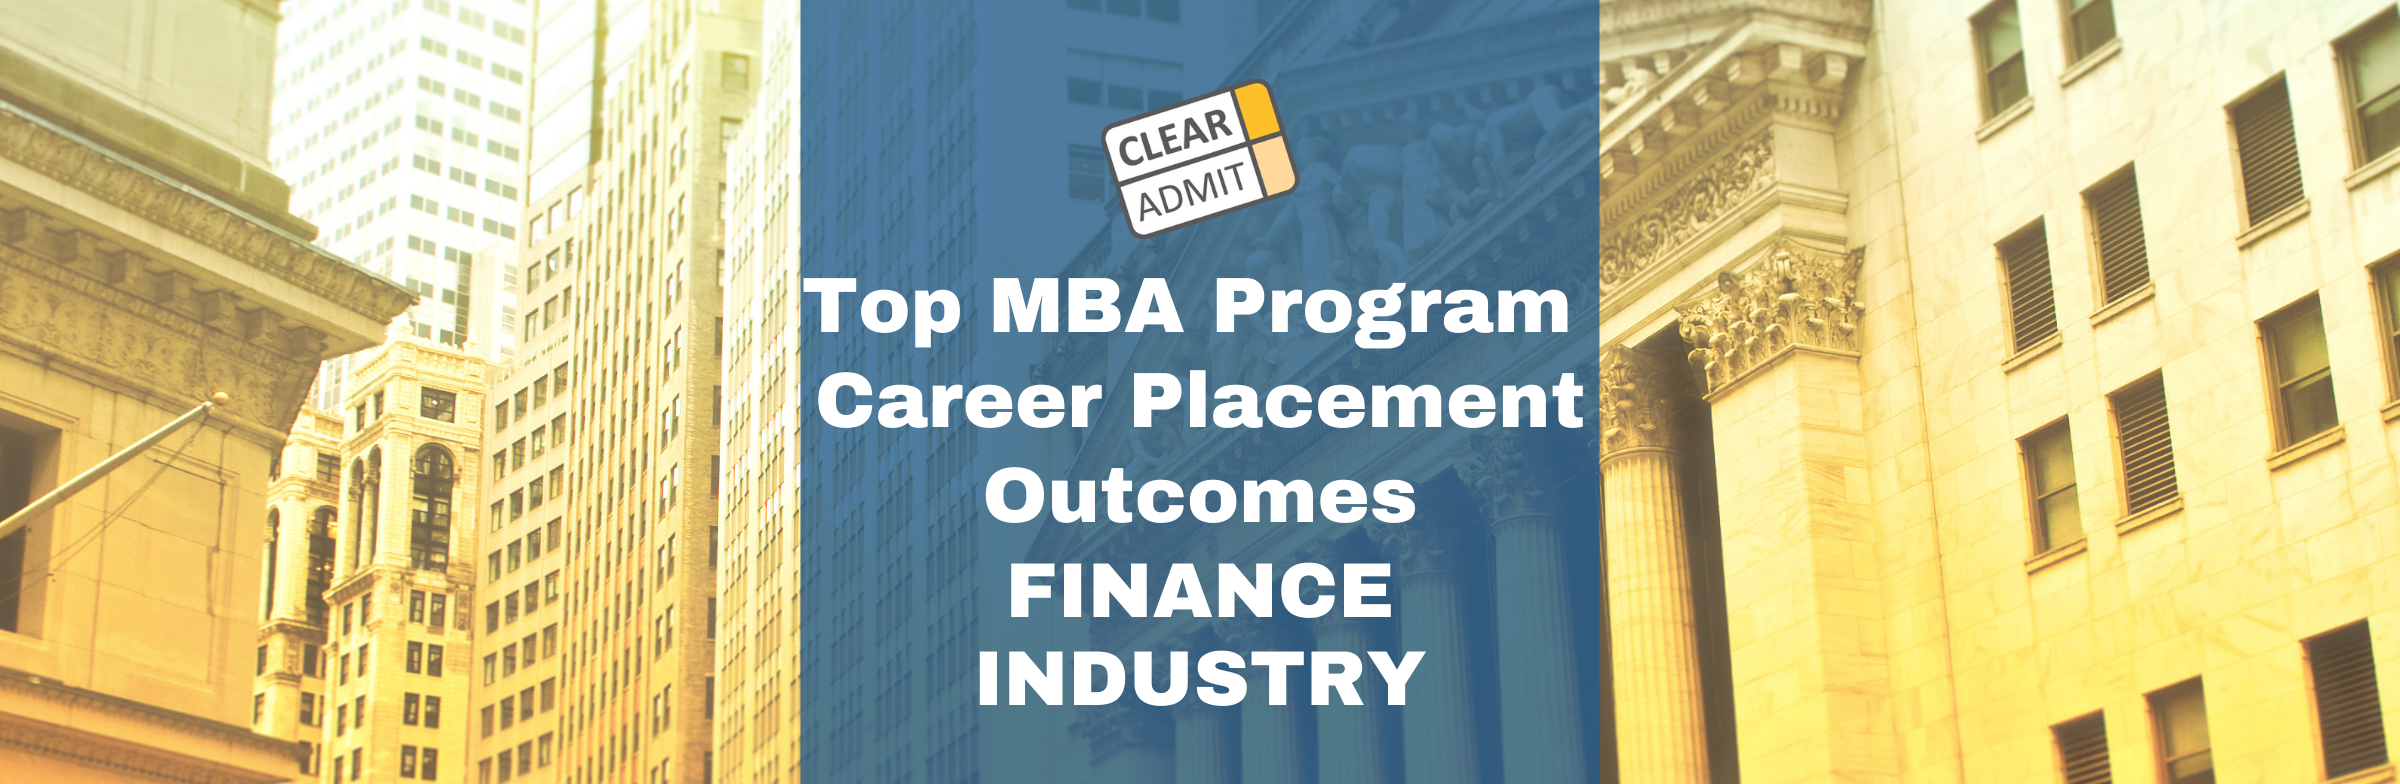 Image for Top MBA Program Career Placement Outcomes: U.S. Job Placement in the Finance Industry